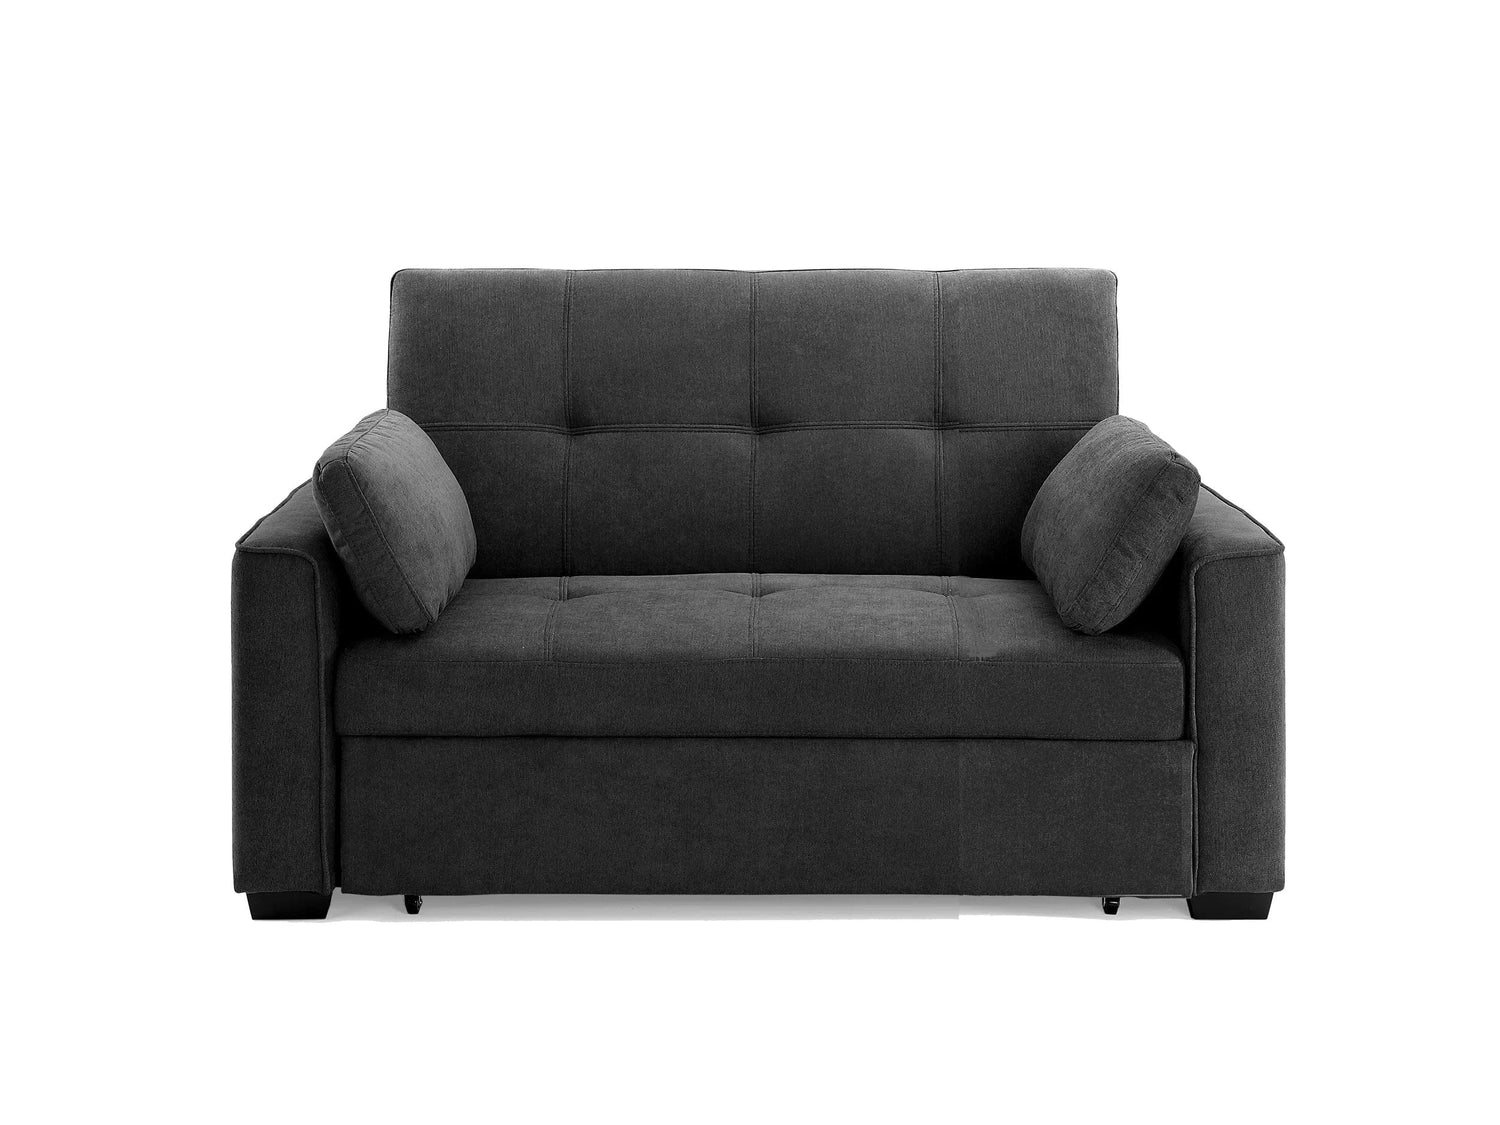 Night And Day Furniture Nantucket Full Sofa Bed - Charcoal